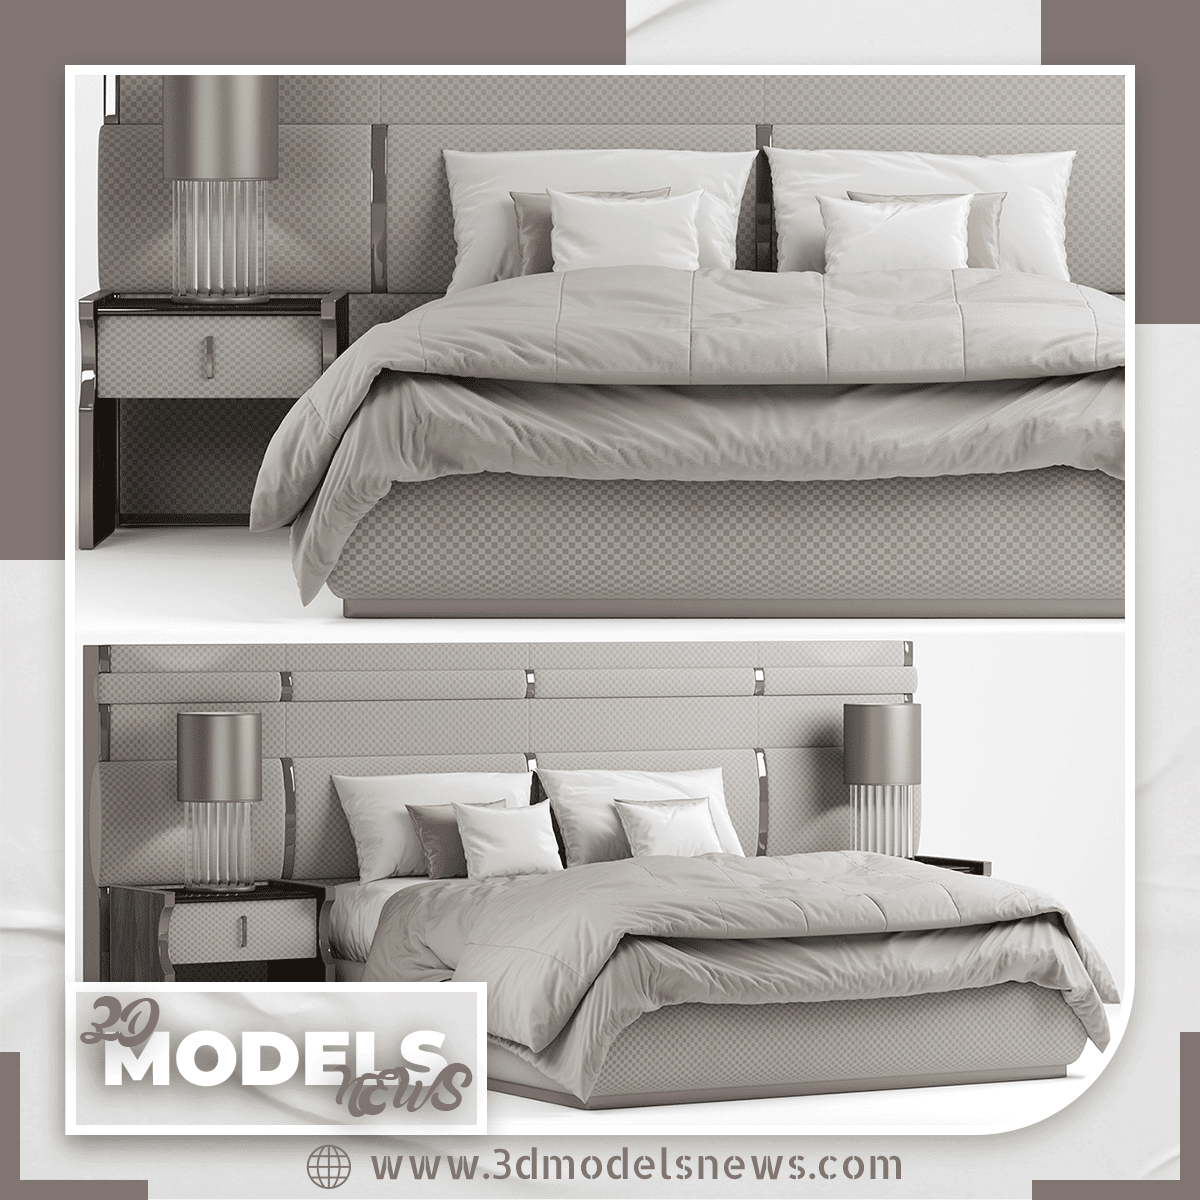 Bed Model Capital Collection Trilogy